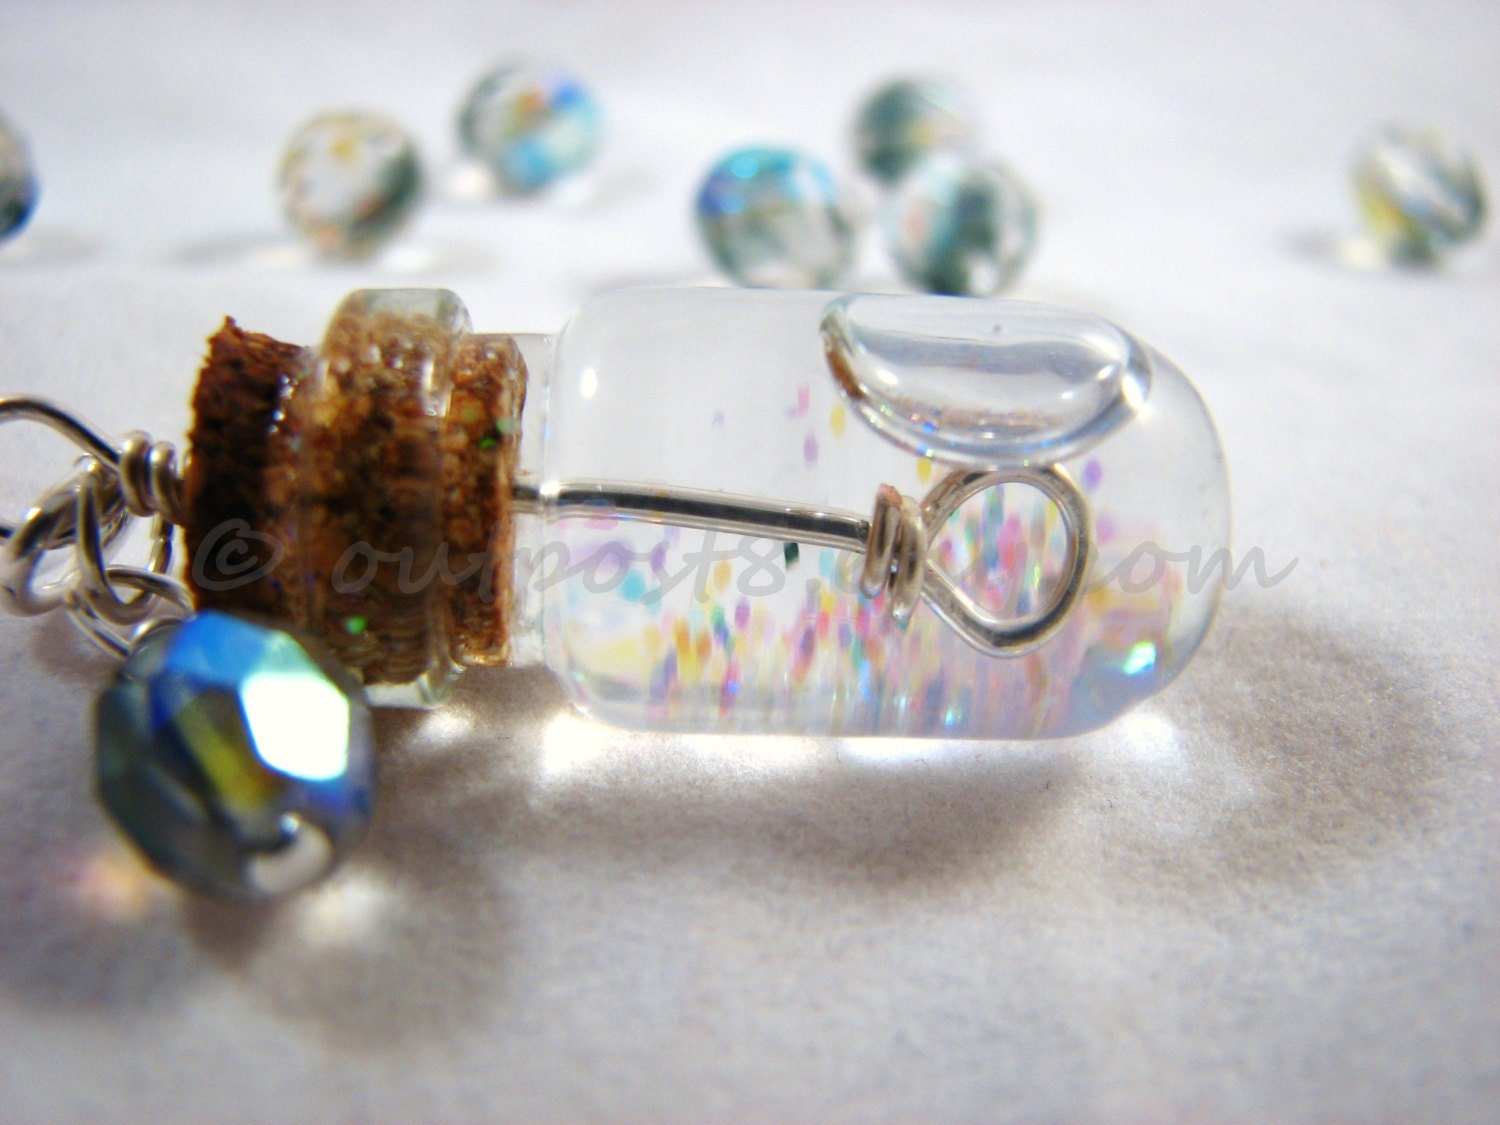 Tiny bubble soap glass bottle necklace. Bubble wand. Kawaii jewelry. Free US shipping. - Outpost8